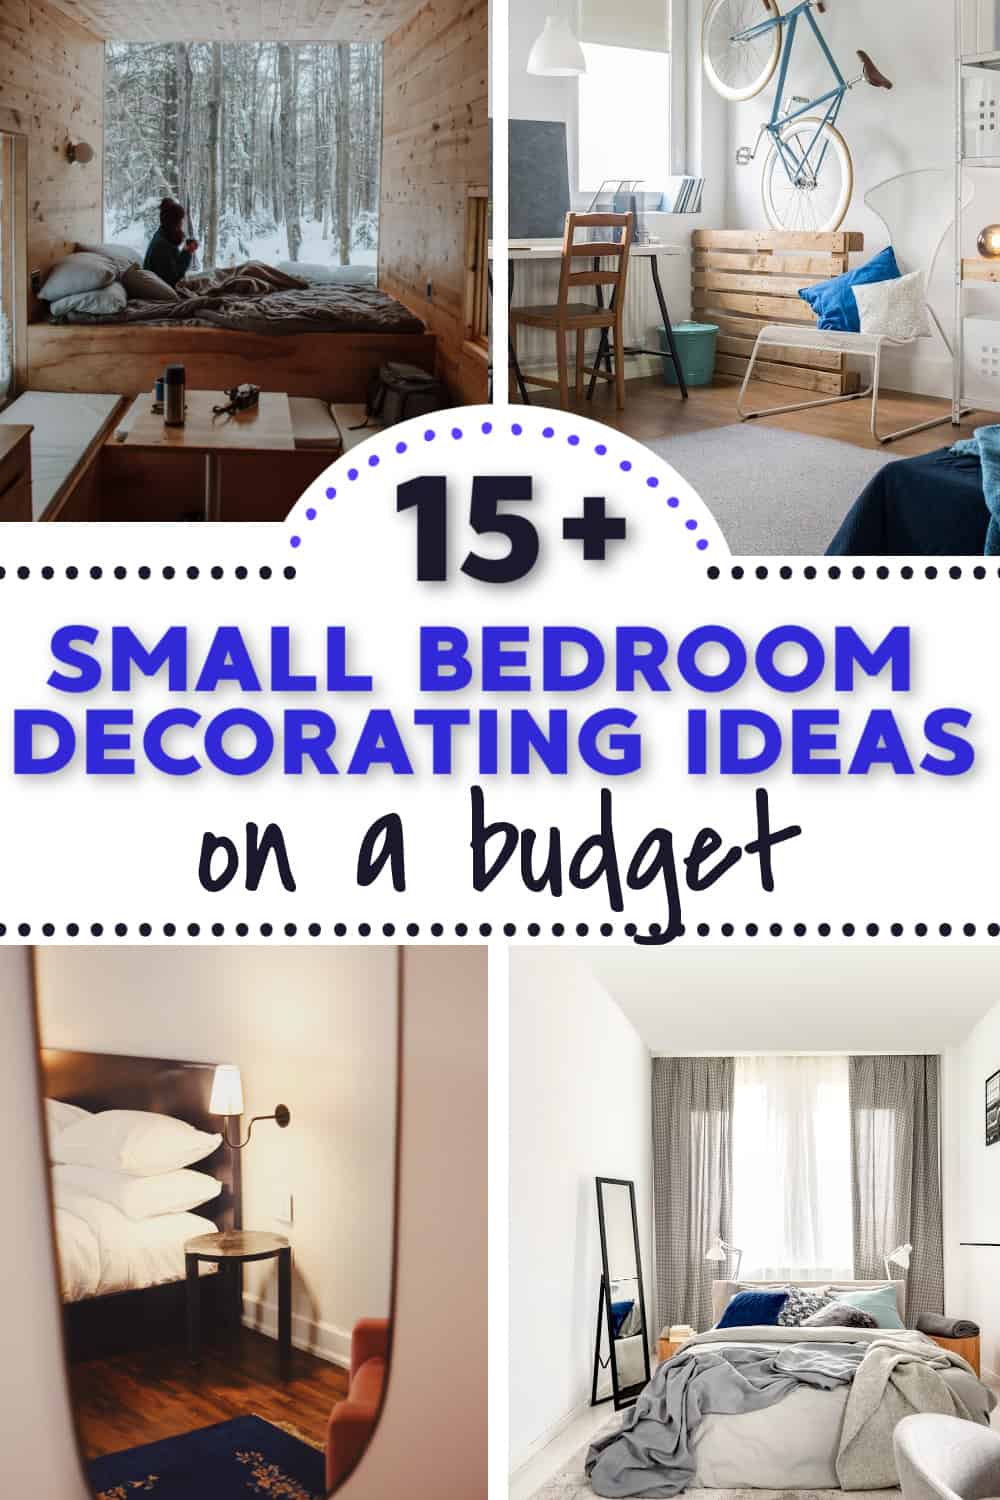 How can I decorate my room for cheap?